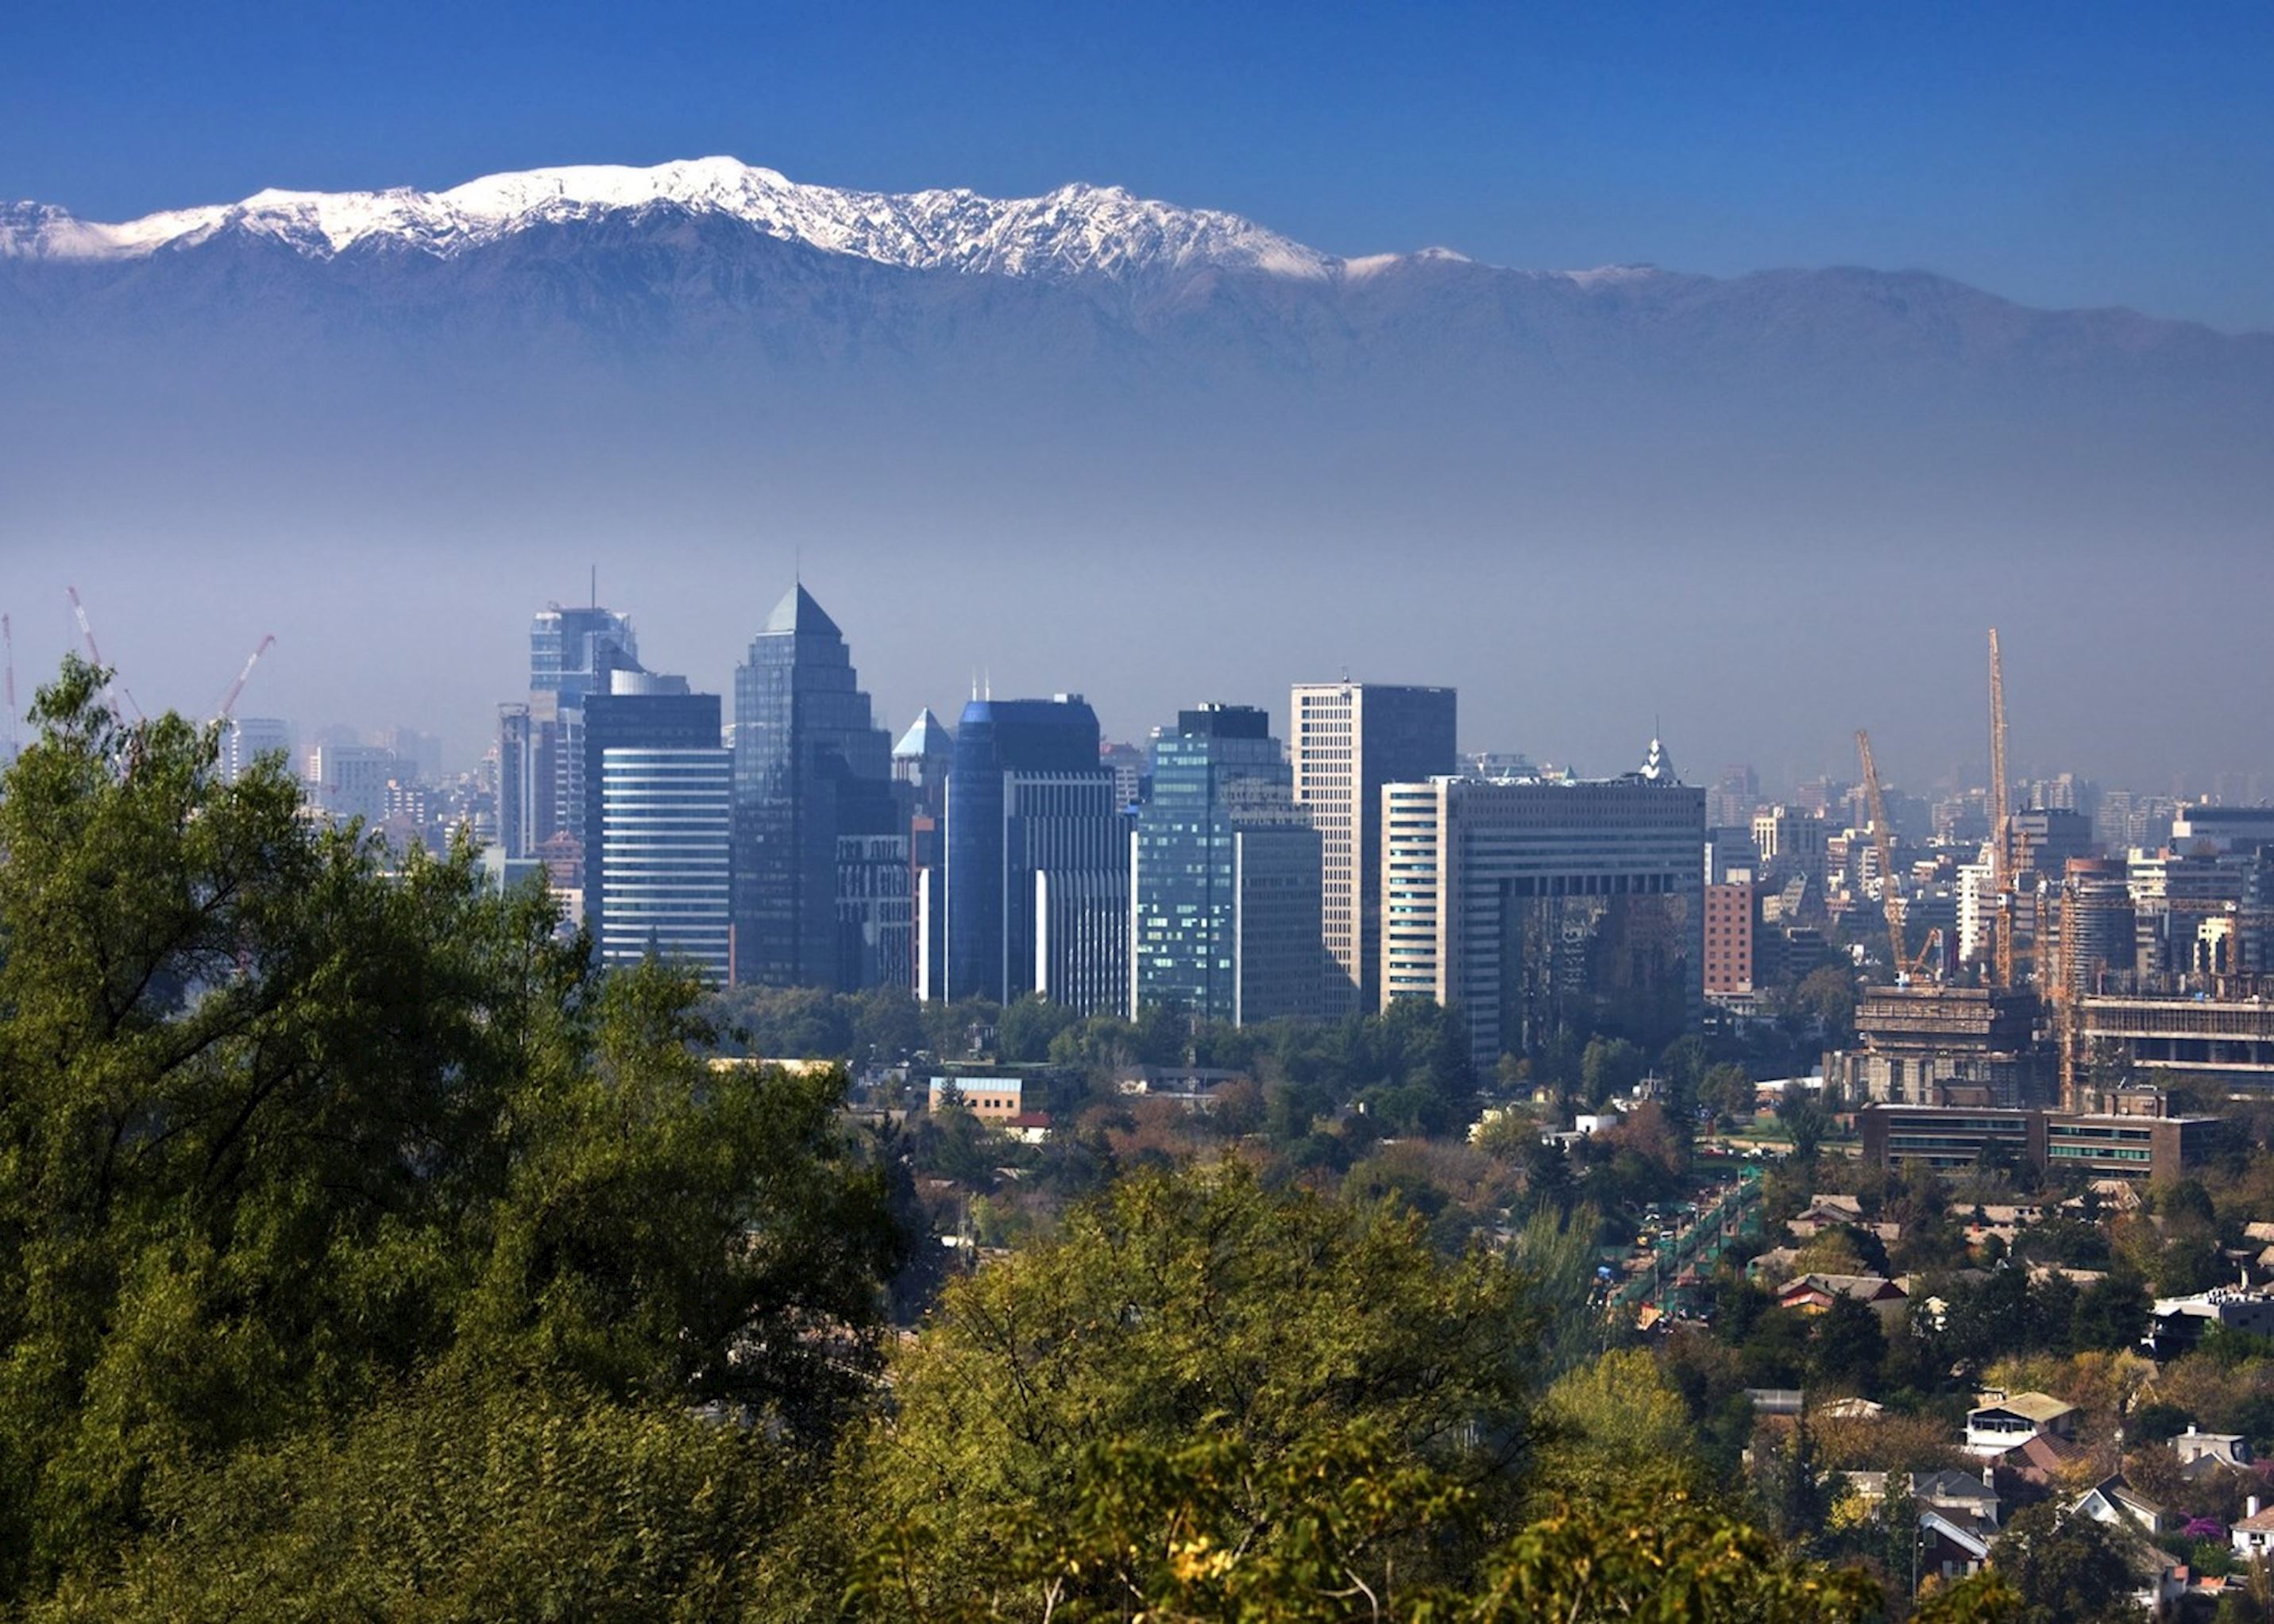 visit-santiago-on-a-trip-to-chile-audley-travel-uk